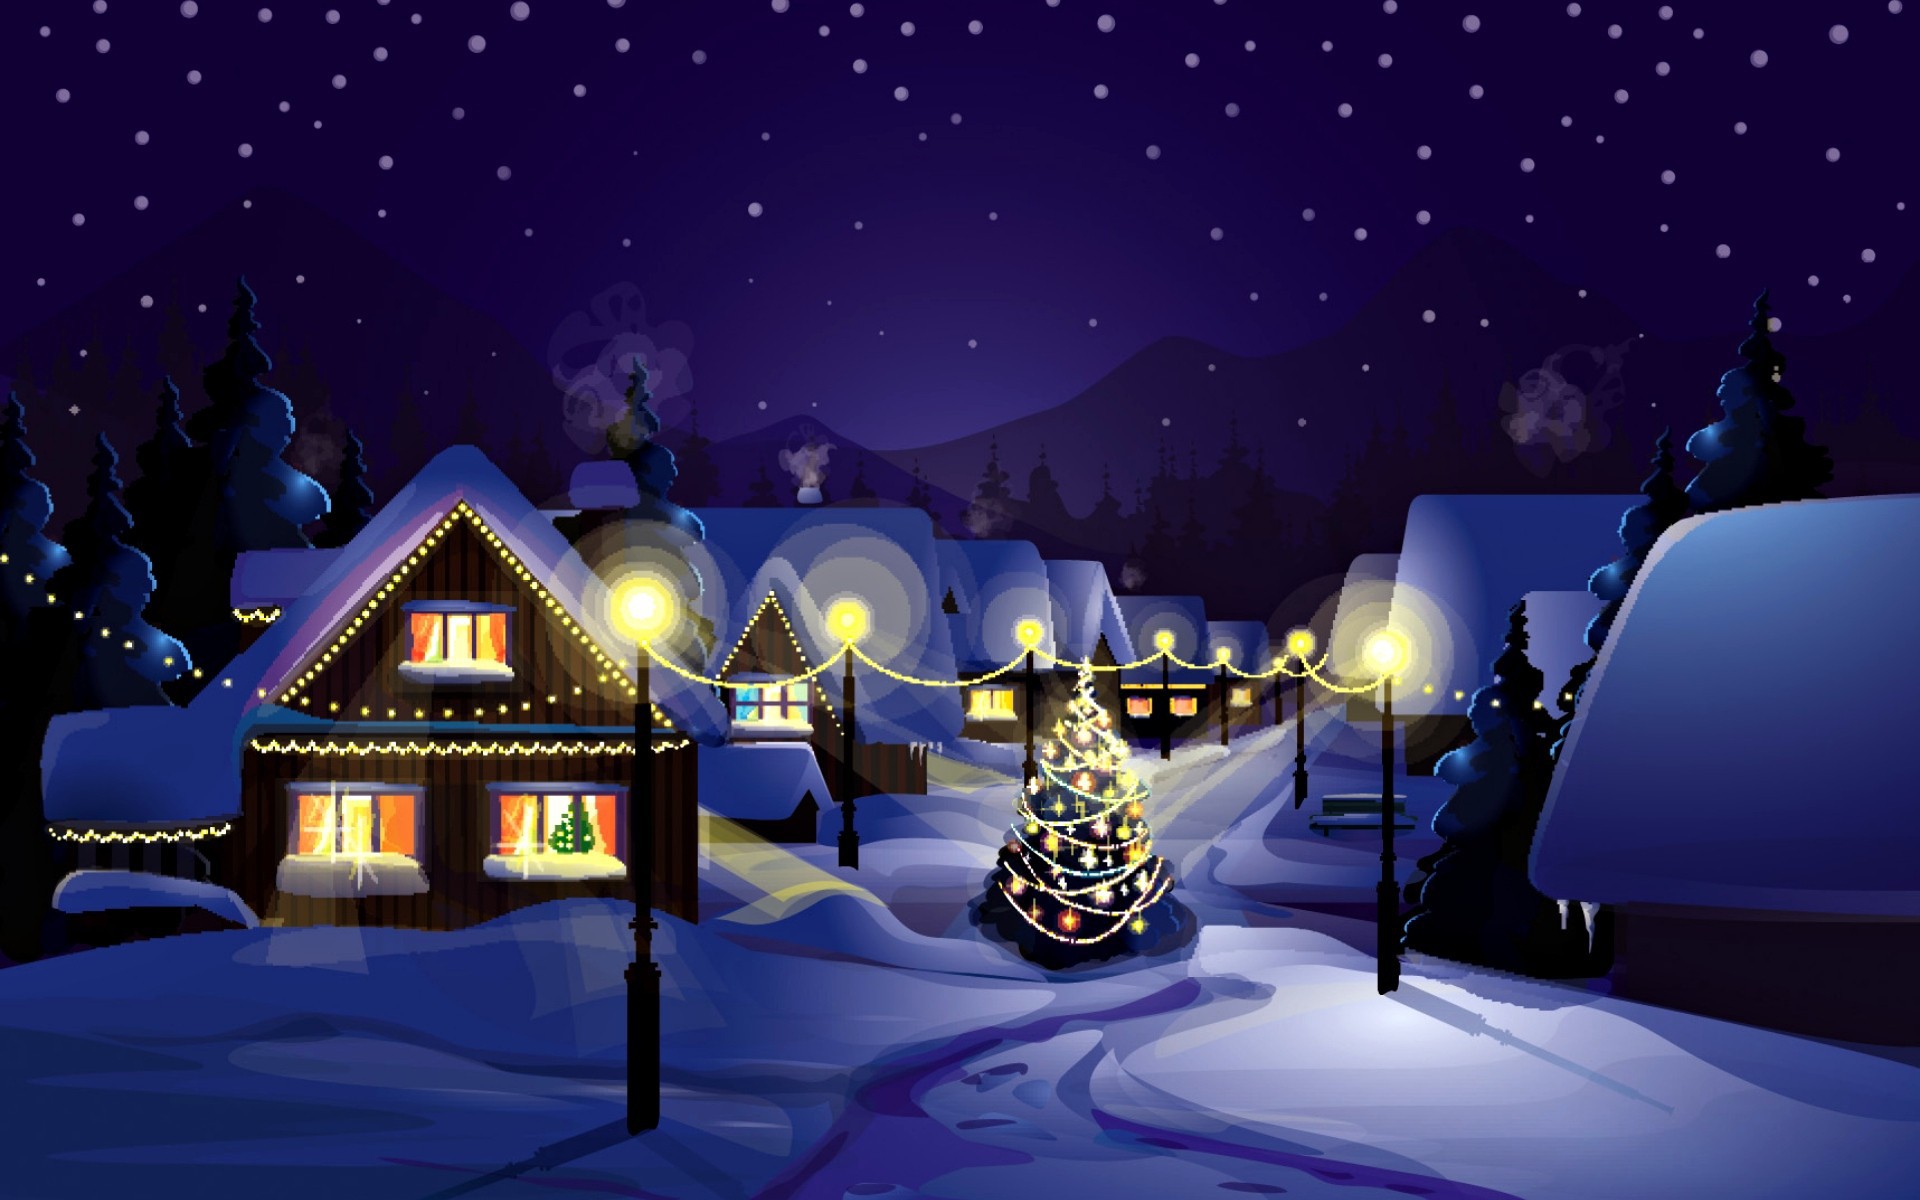 Country Christmas wallpapers and images  wallpapers, pictures, photos